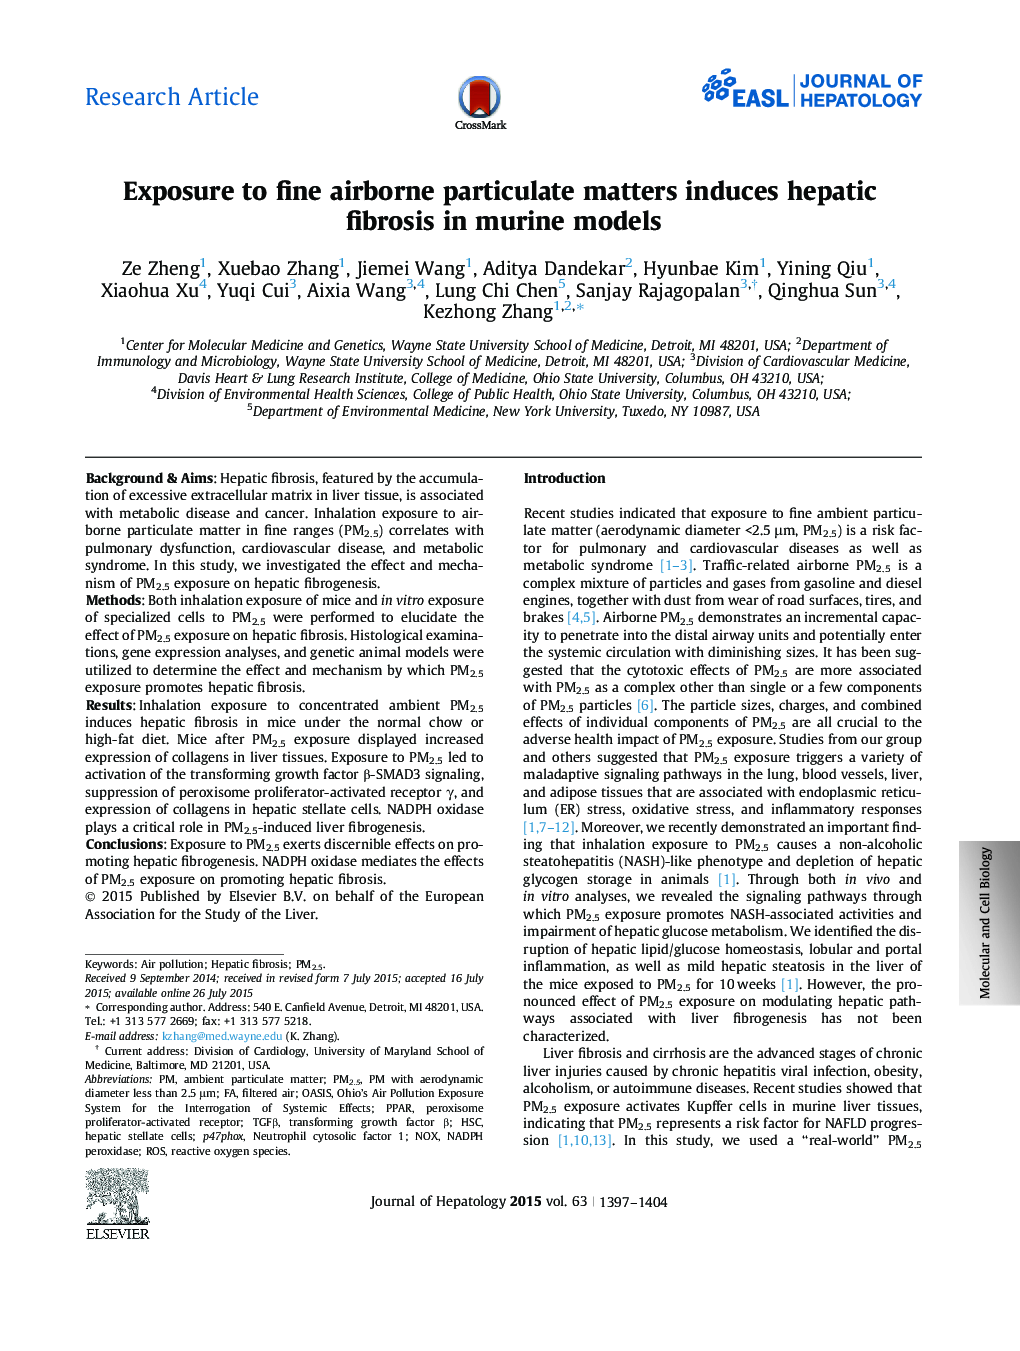 Exposure to fine airborne particulate matters induces hepatic fibrosis in murine models